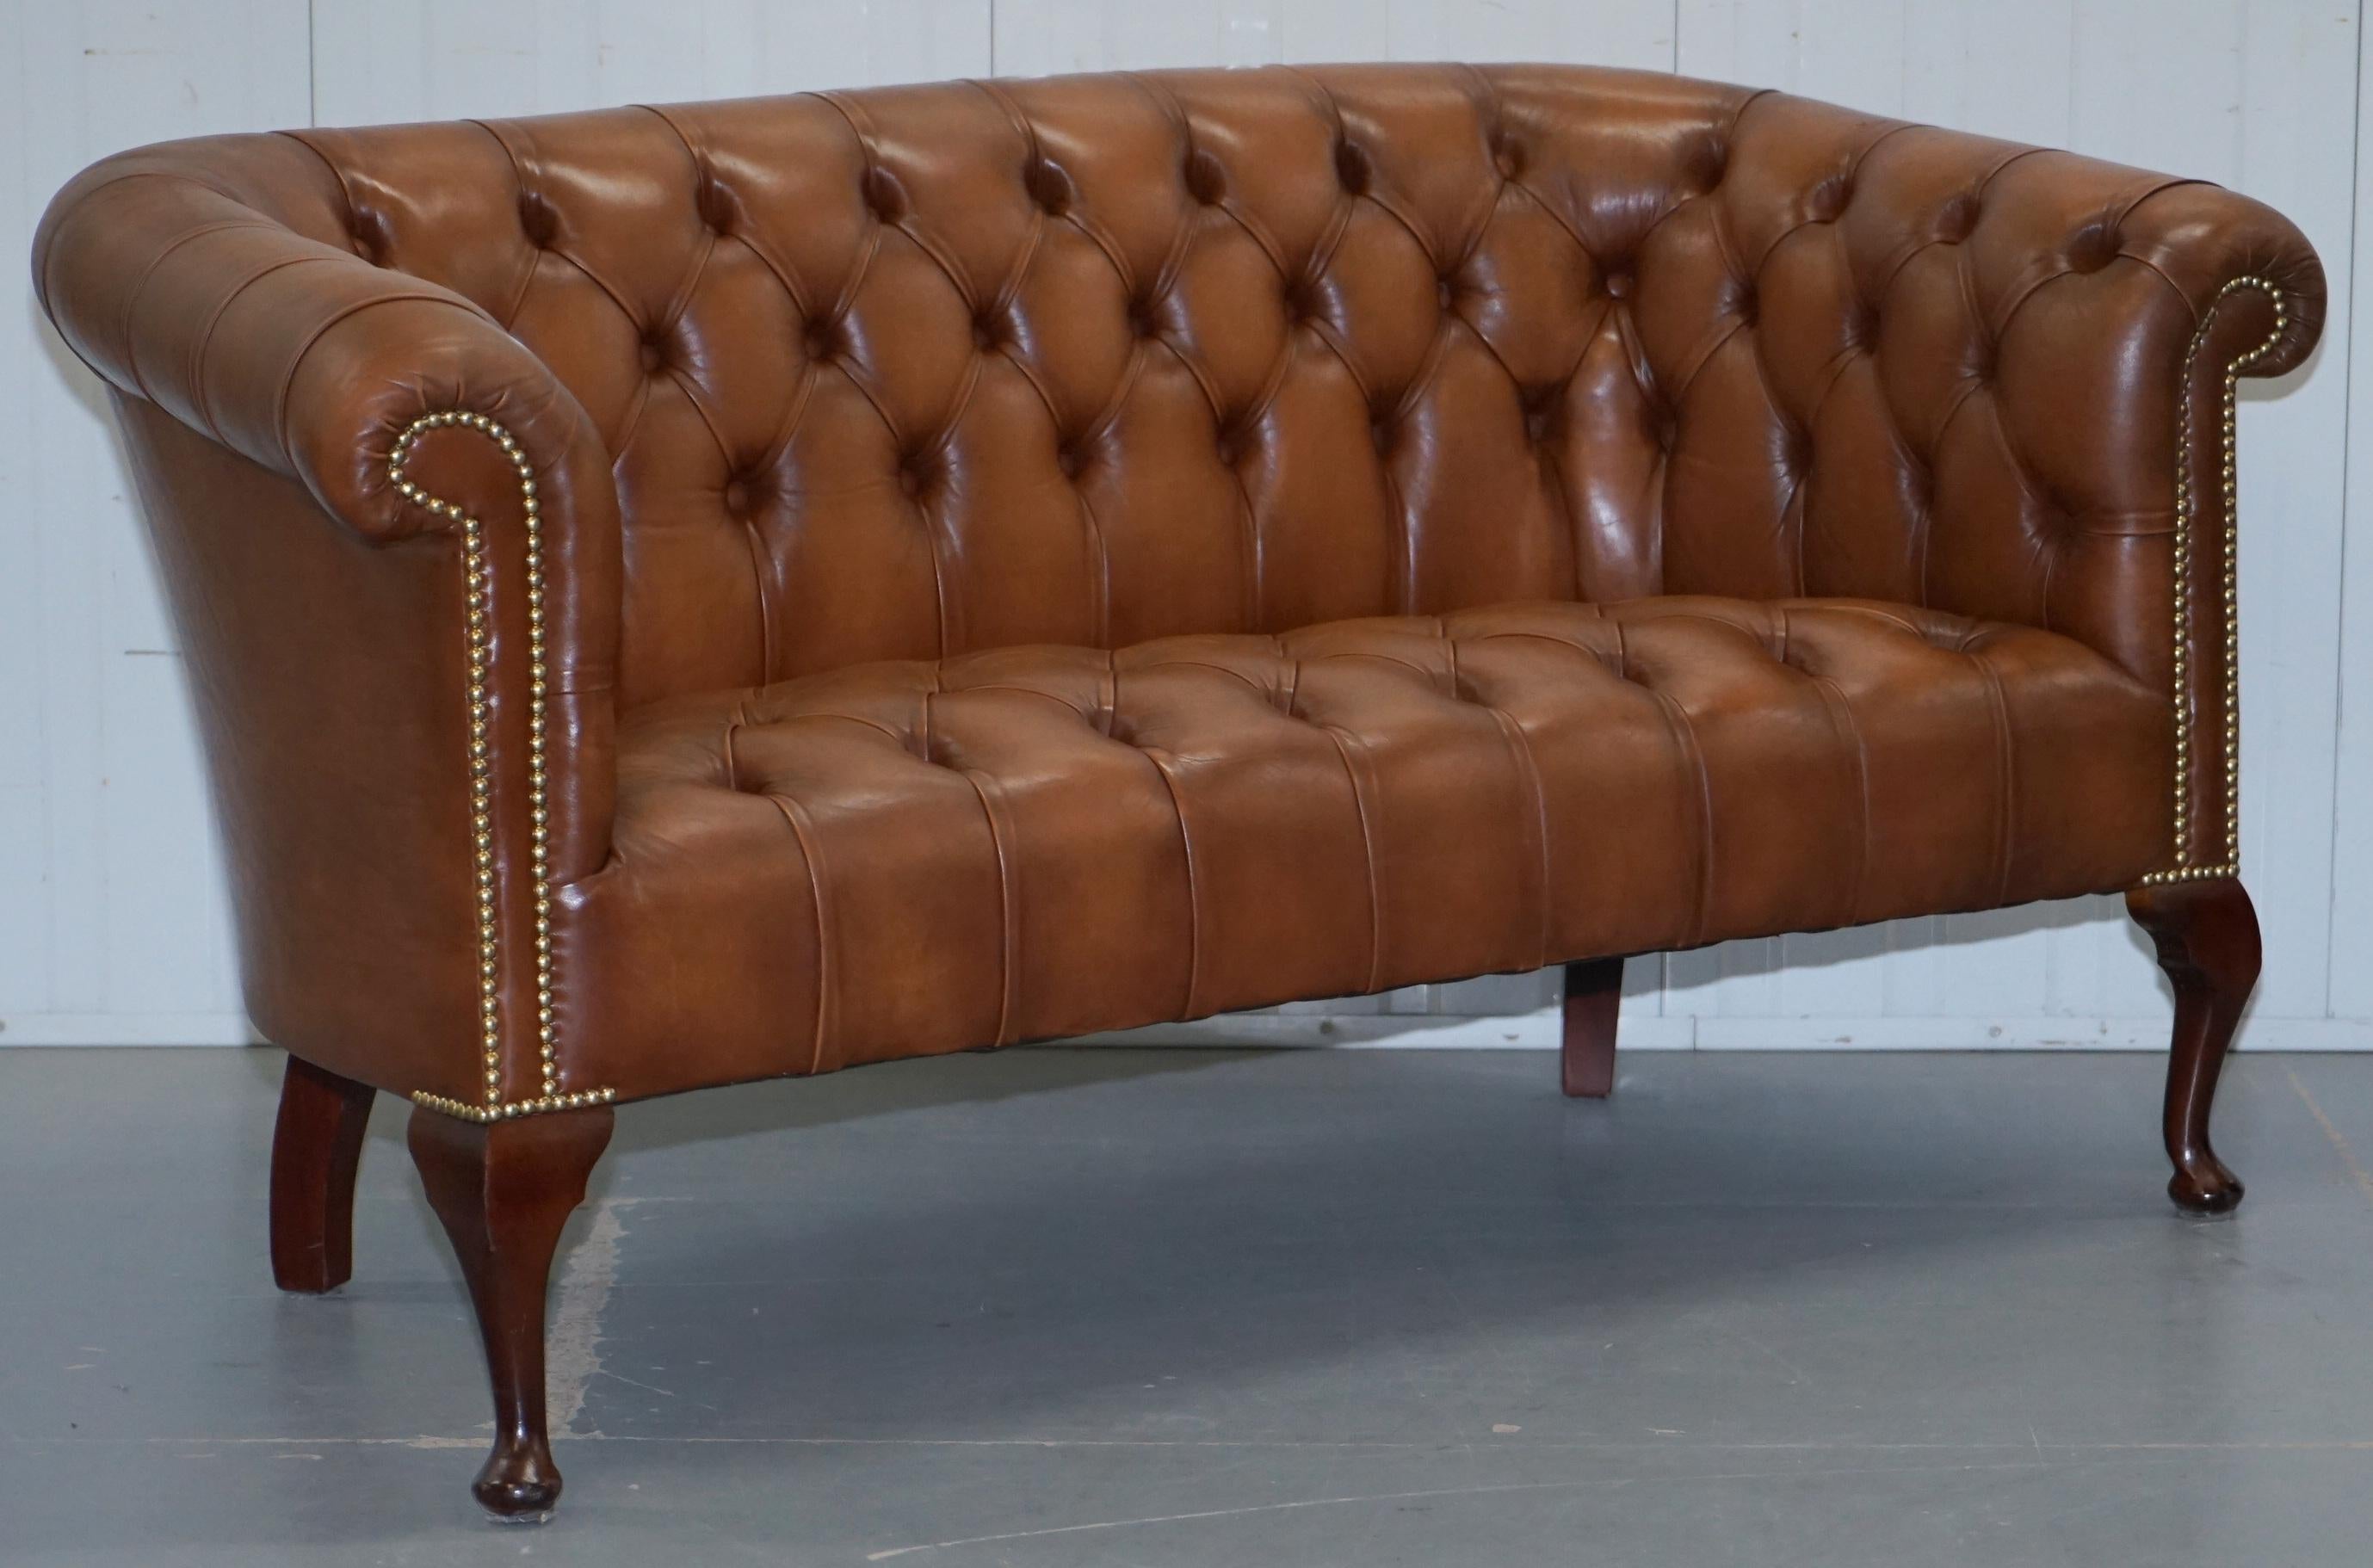 We are delighted to offer for auction this lovely handmade in England original Chesterfield brown leather tub armchair and matching small sofa

There are around 50-100 high definition super-sized pictures at the bottom of this page

A very good